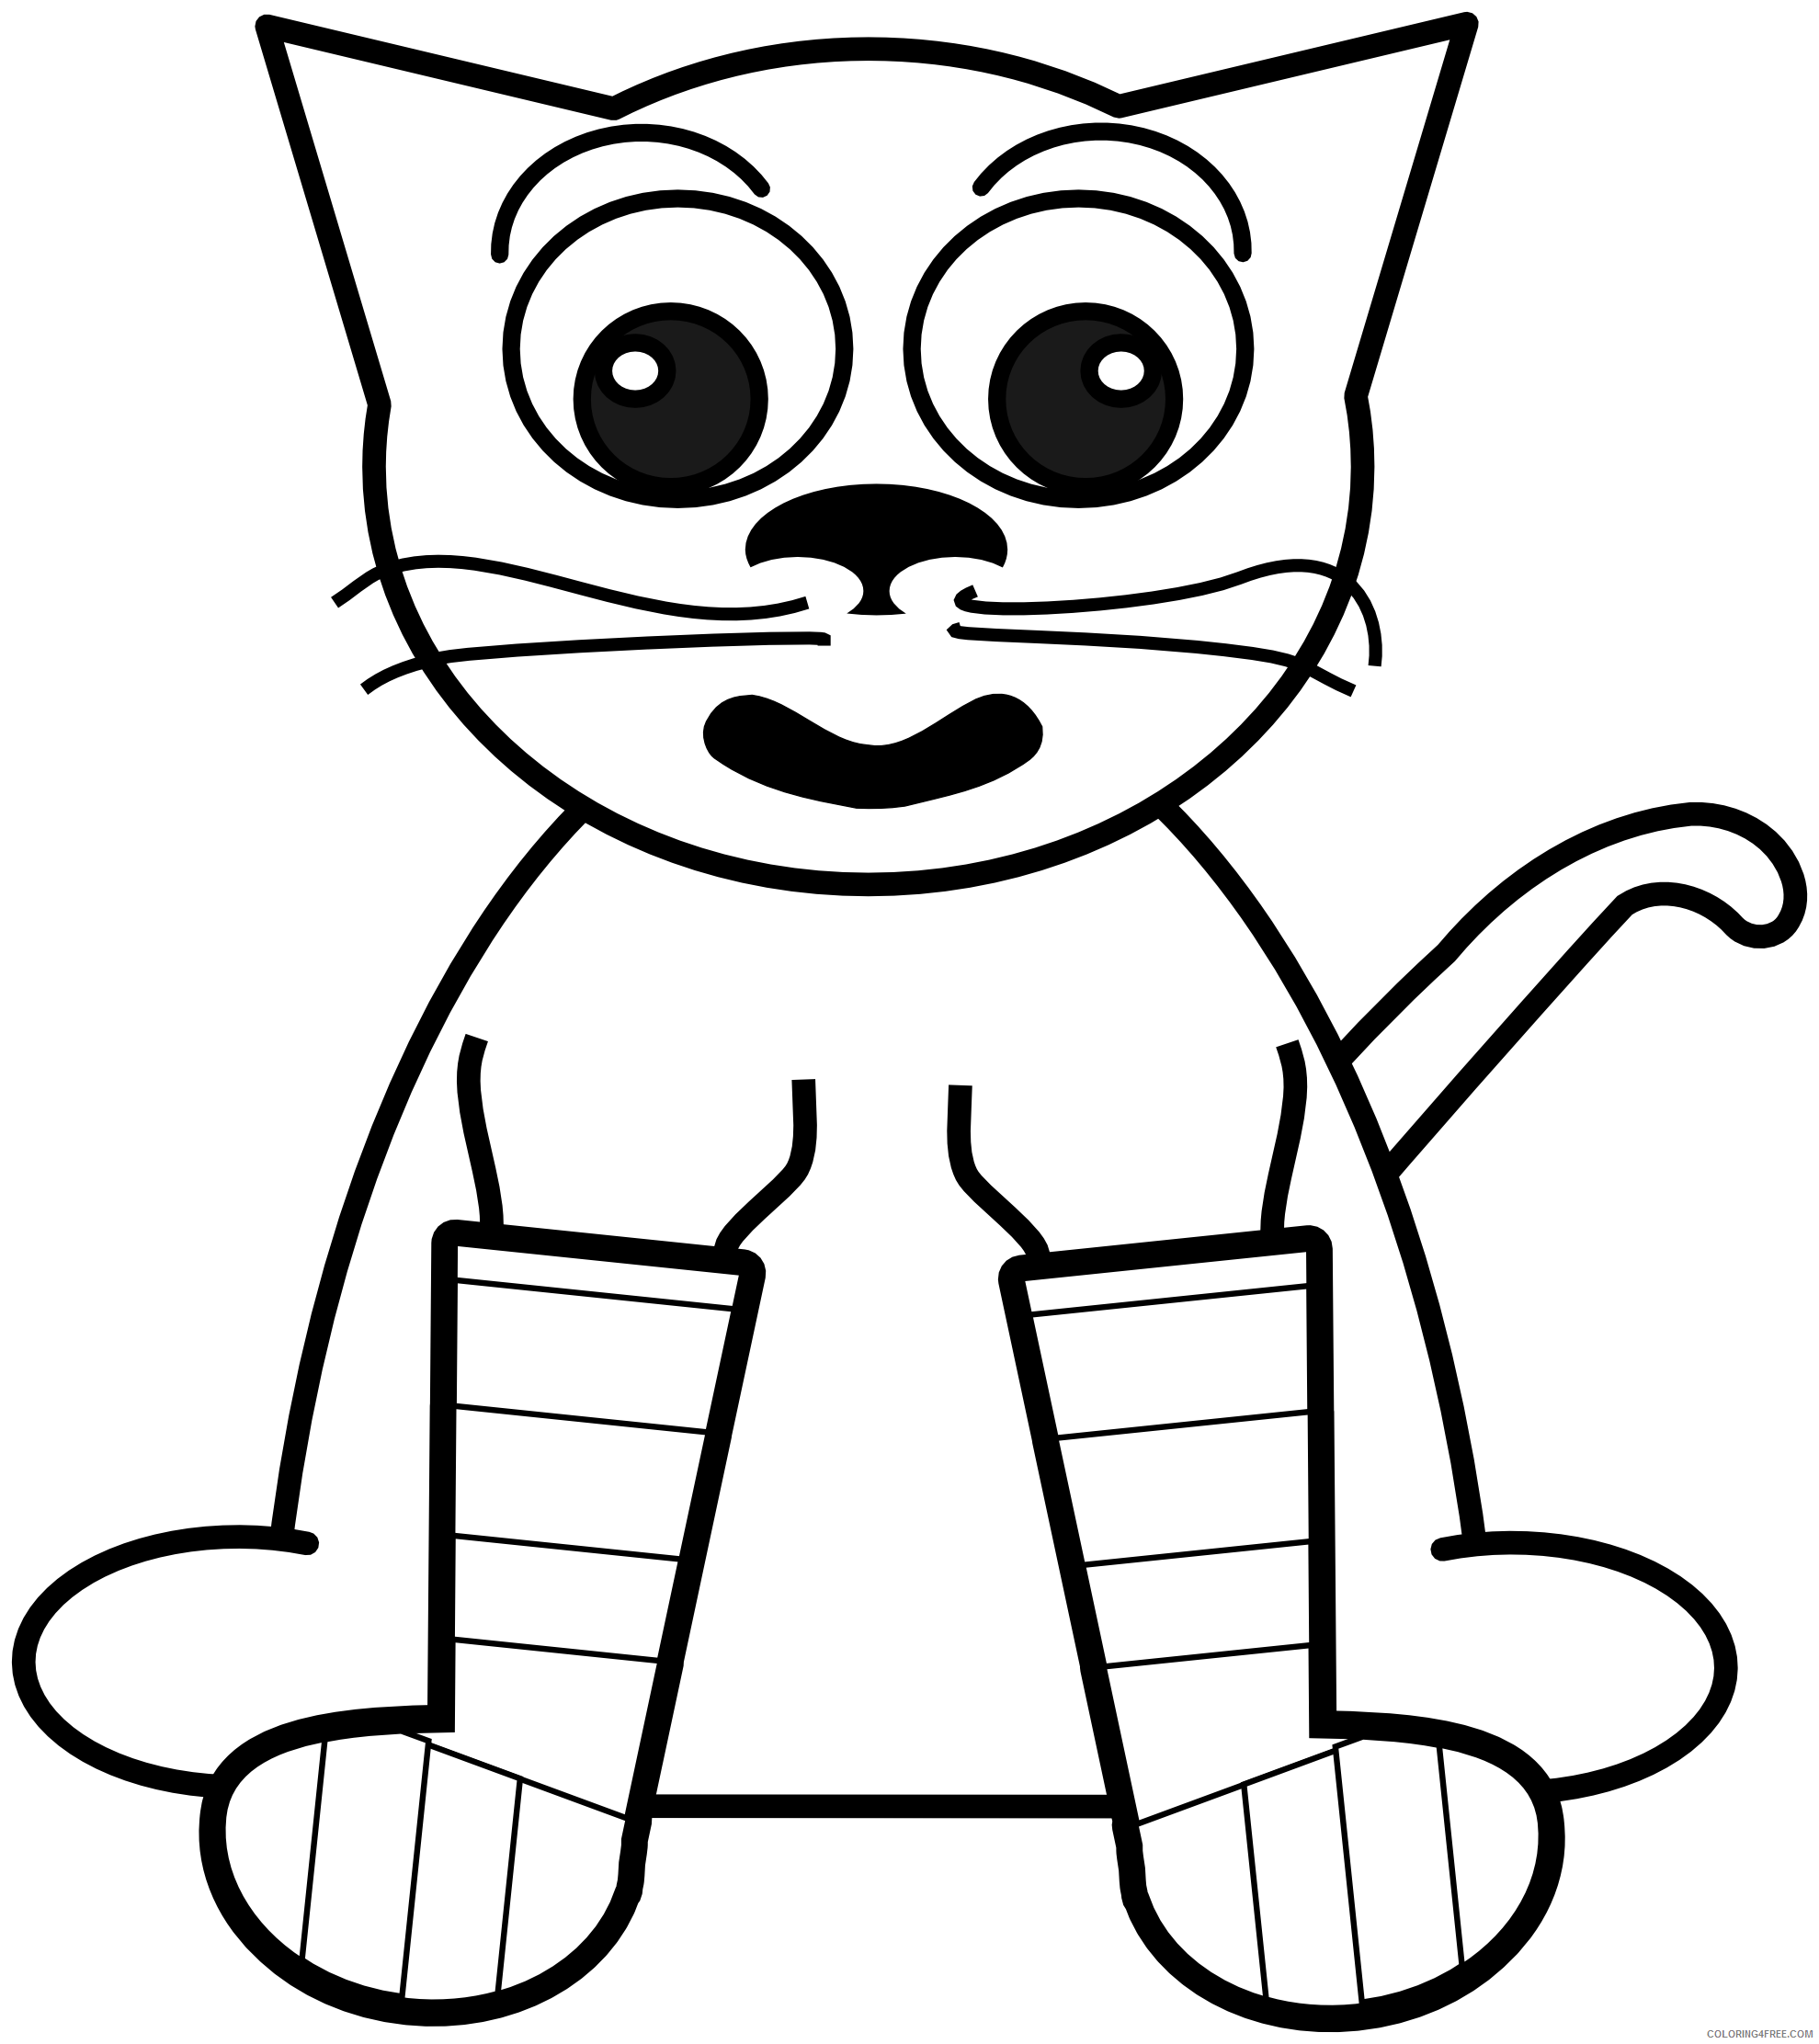 Cat Outline Coloring Pages rainbow Printable Coloring4free